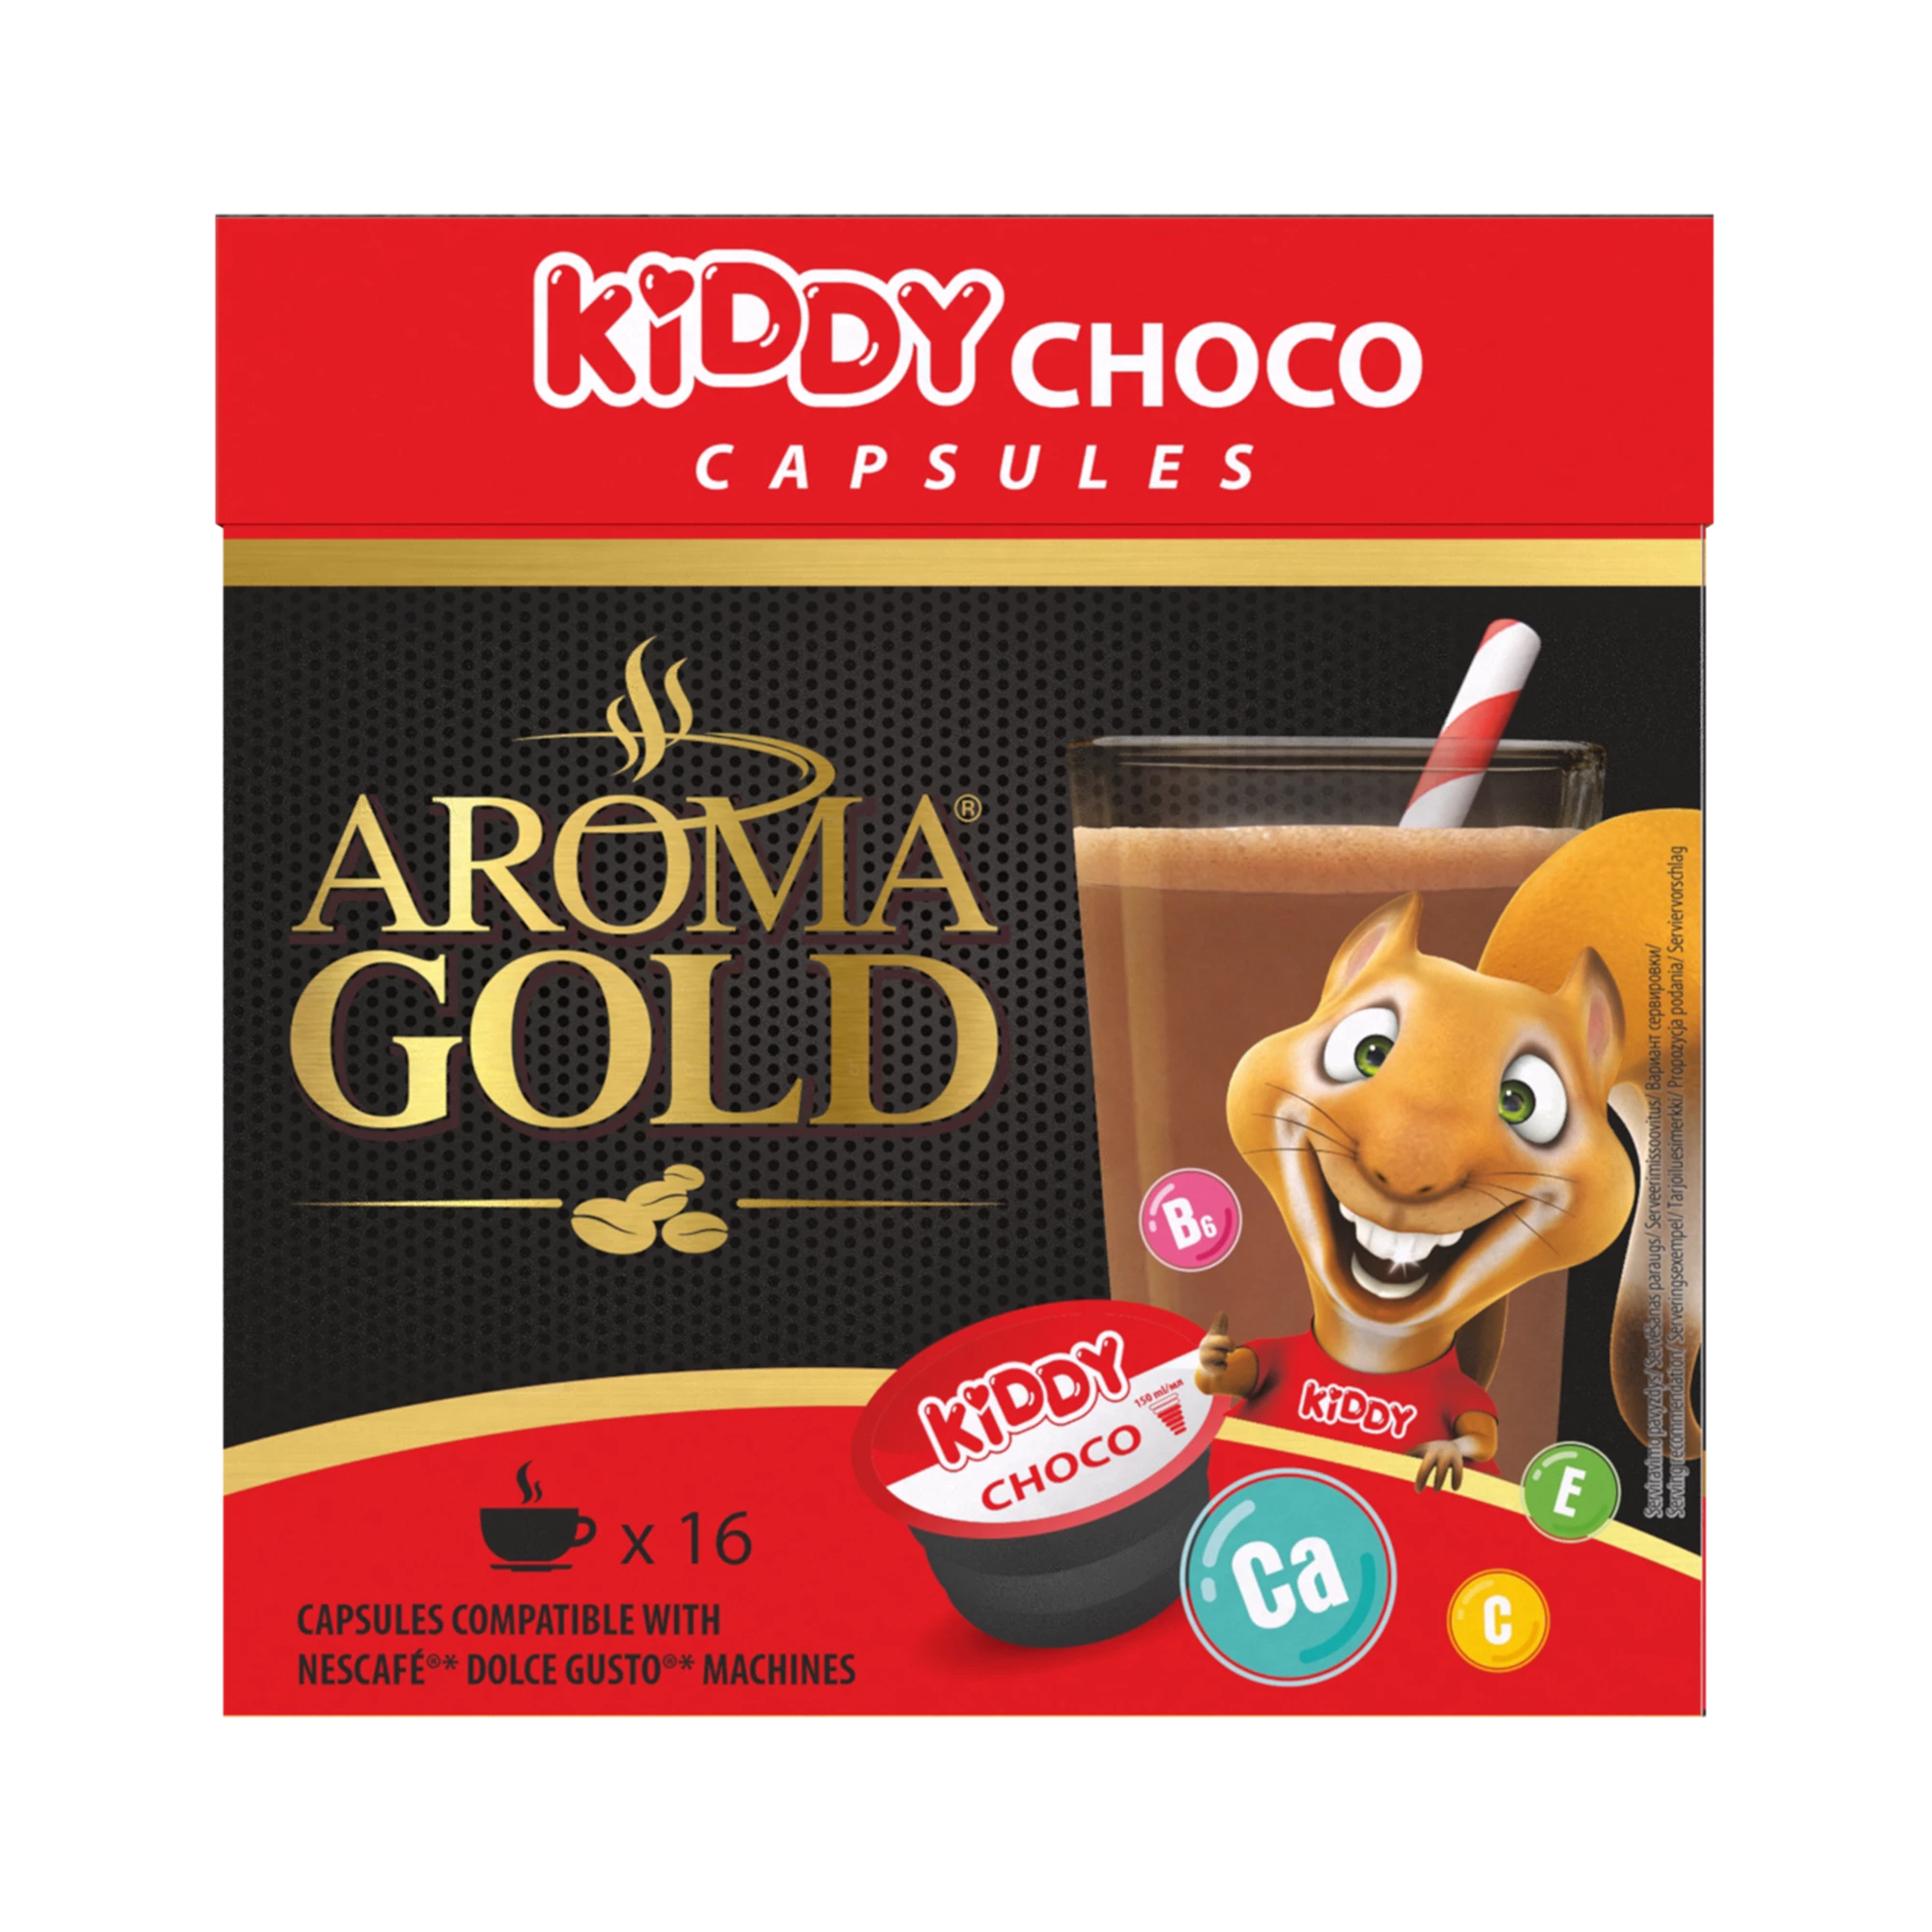 Capsules "kiddy Cacao" Compatibel Dolce Gusto X 16 - Aroma Goud